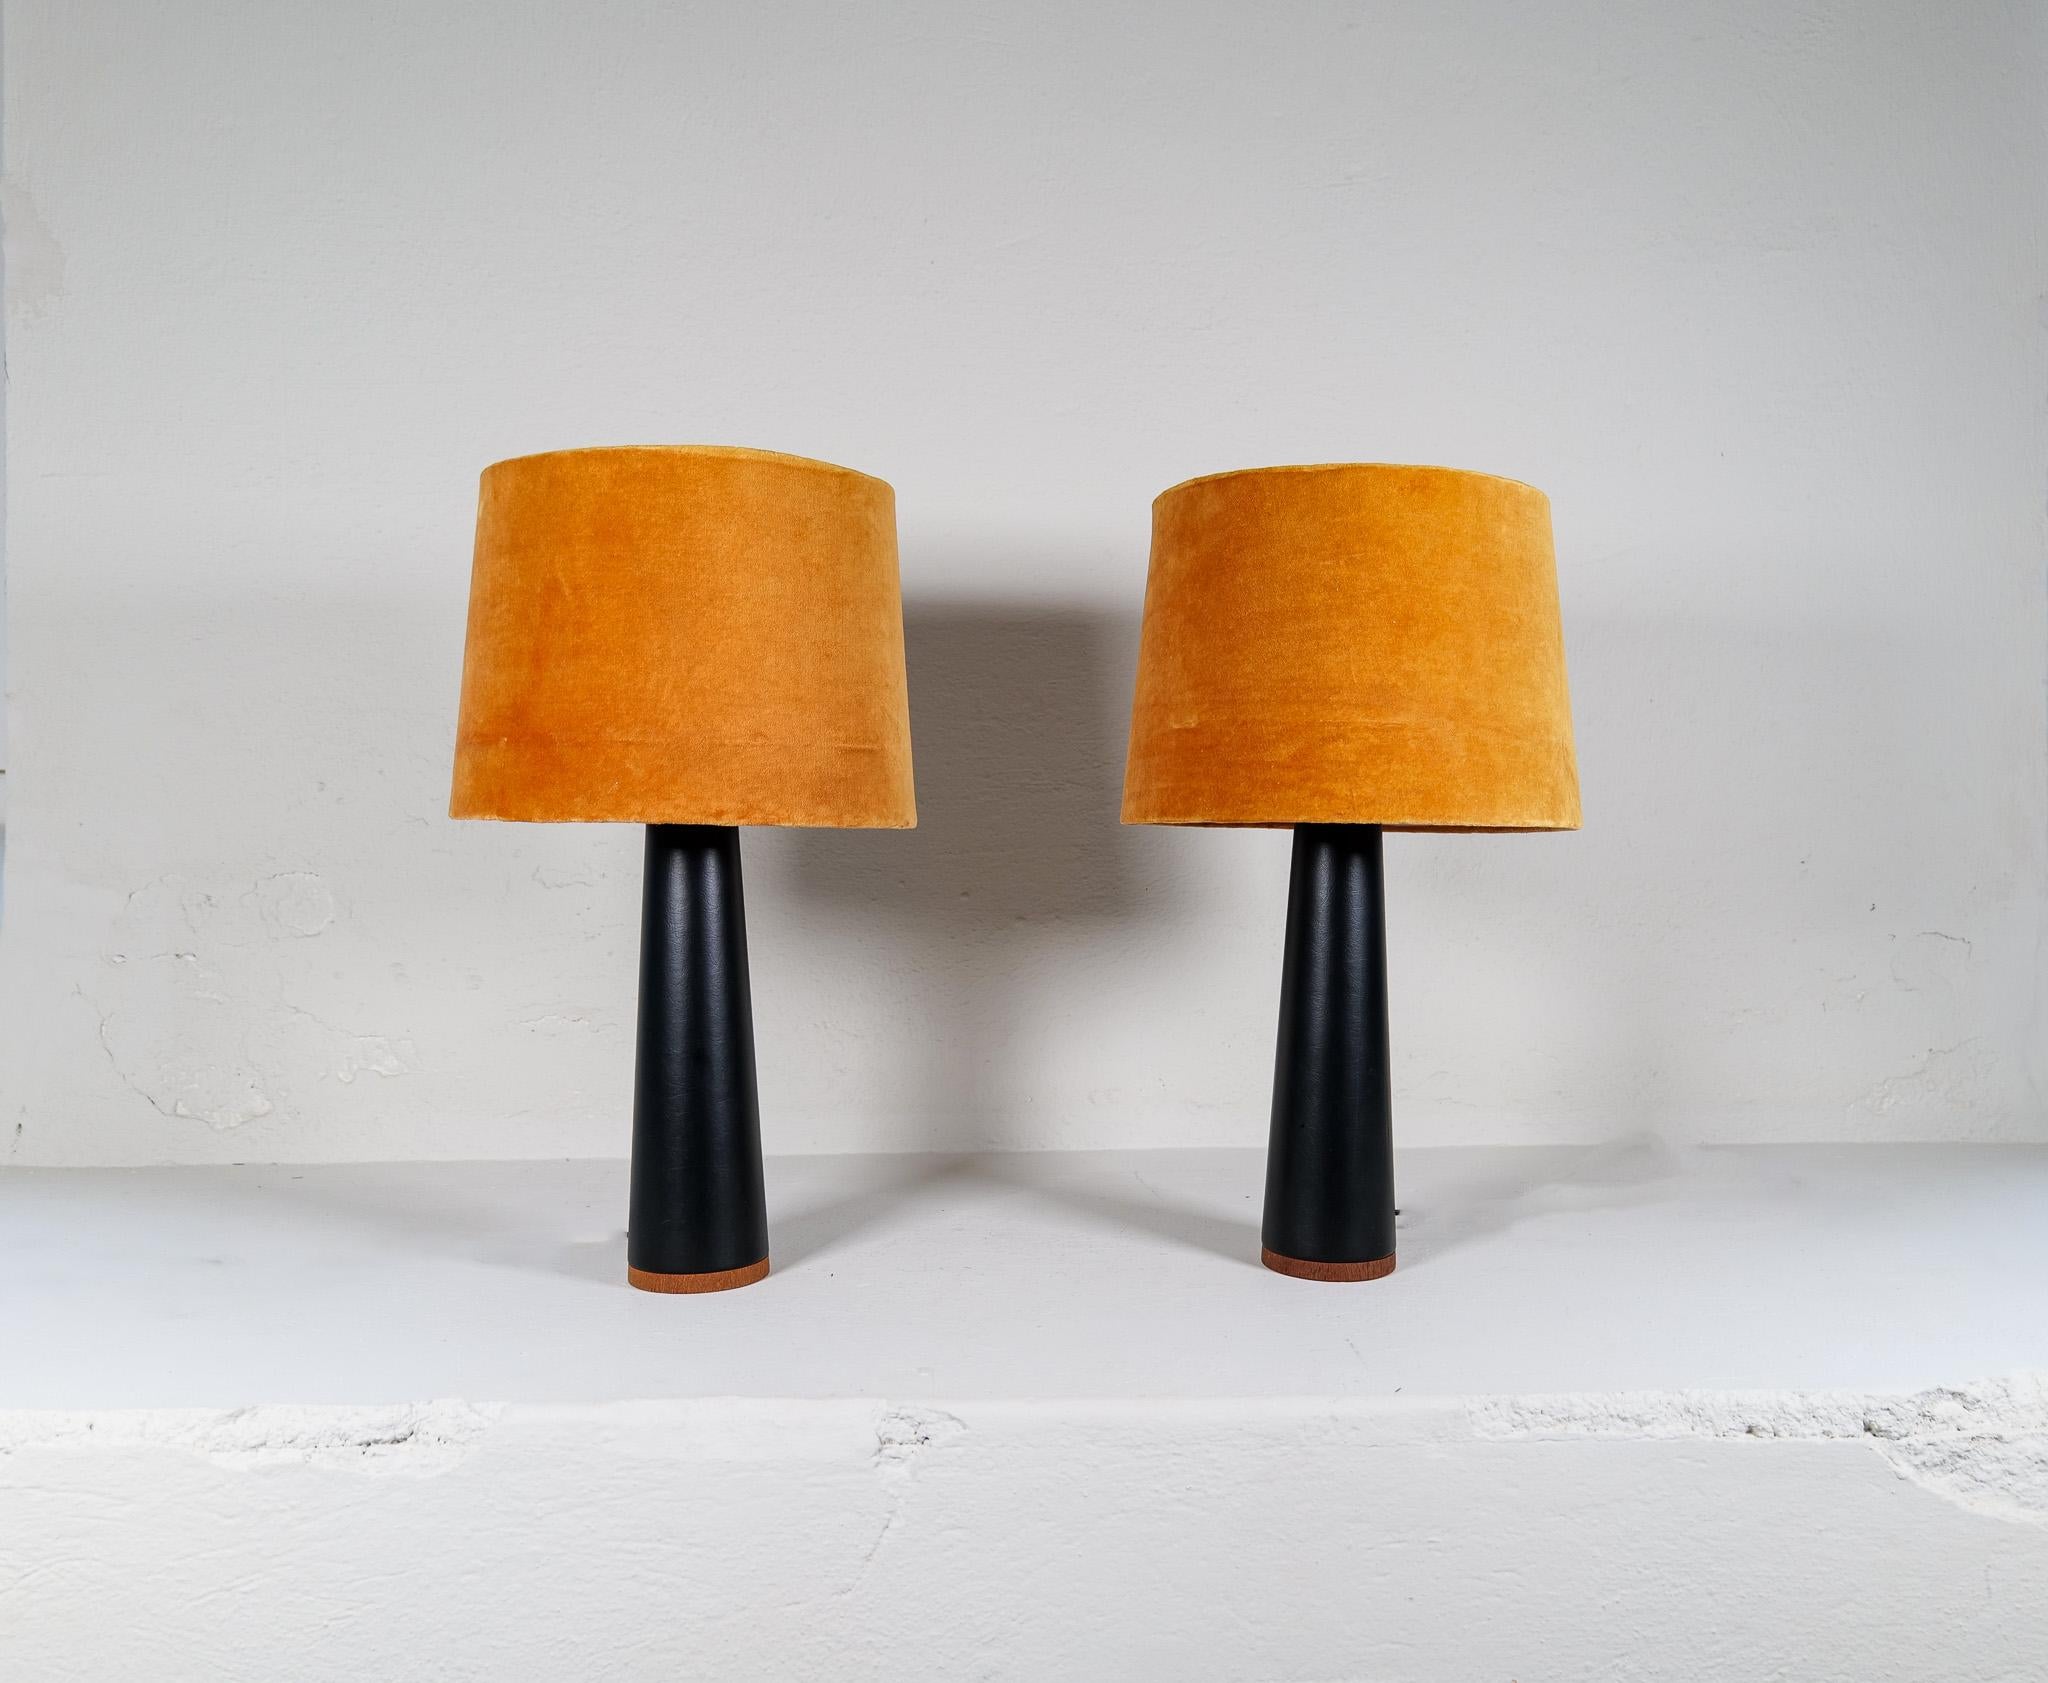 Pair of table lamps manufactured in Sweden and produced by famous Luxus. They are made in black synthetic leather with stiches around a teak base. 

Nice vintage condition.

Dimensions: Height 37cm, Base 11 diameter, with shade height 63 cm depth 32